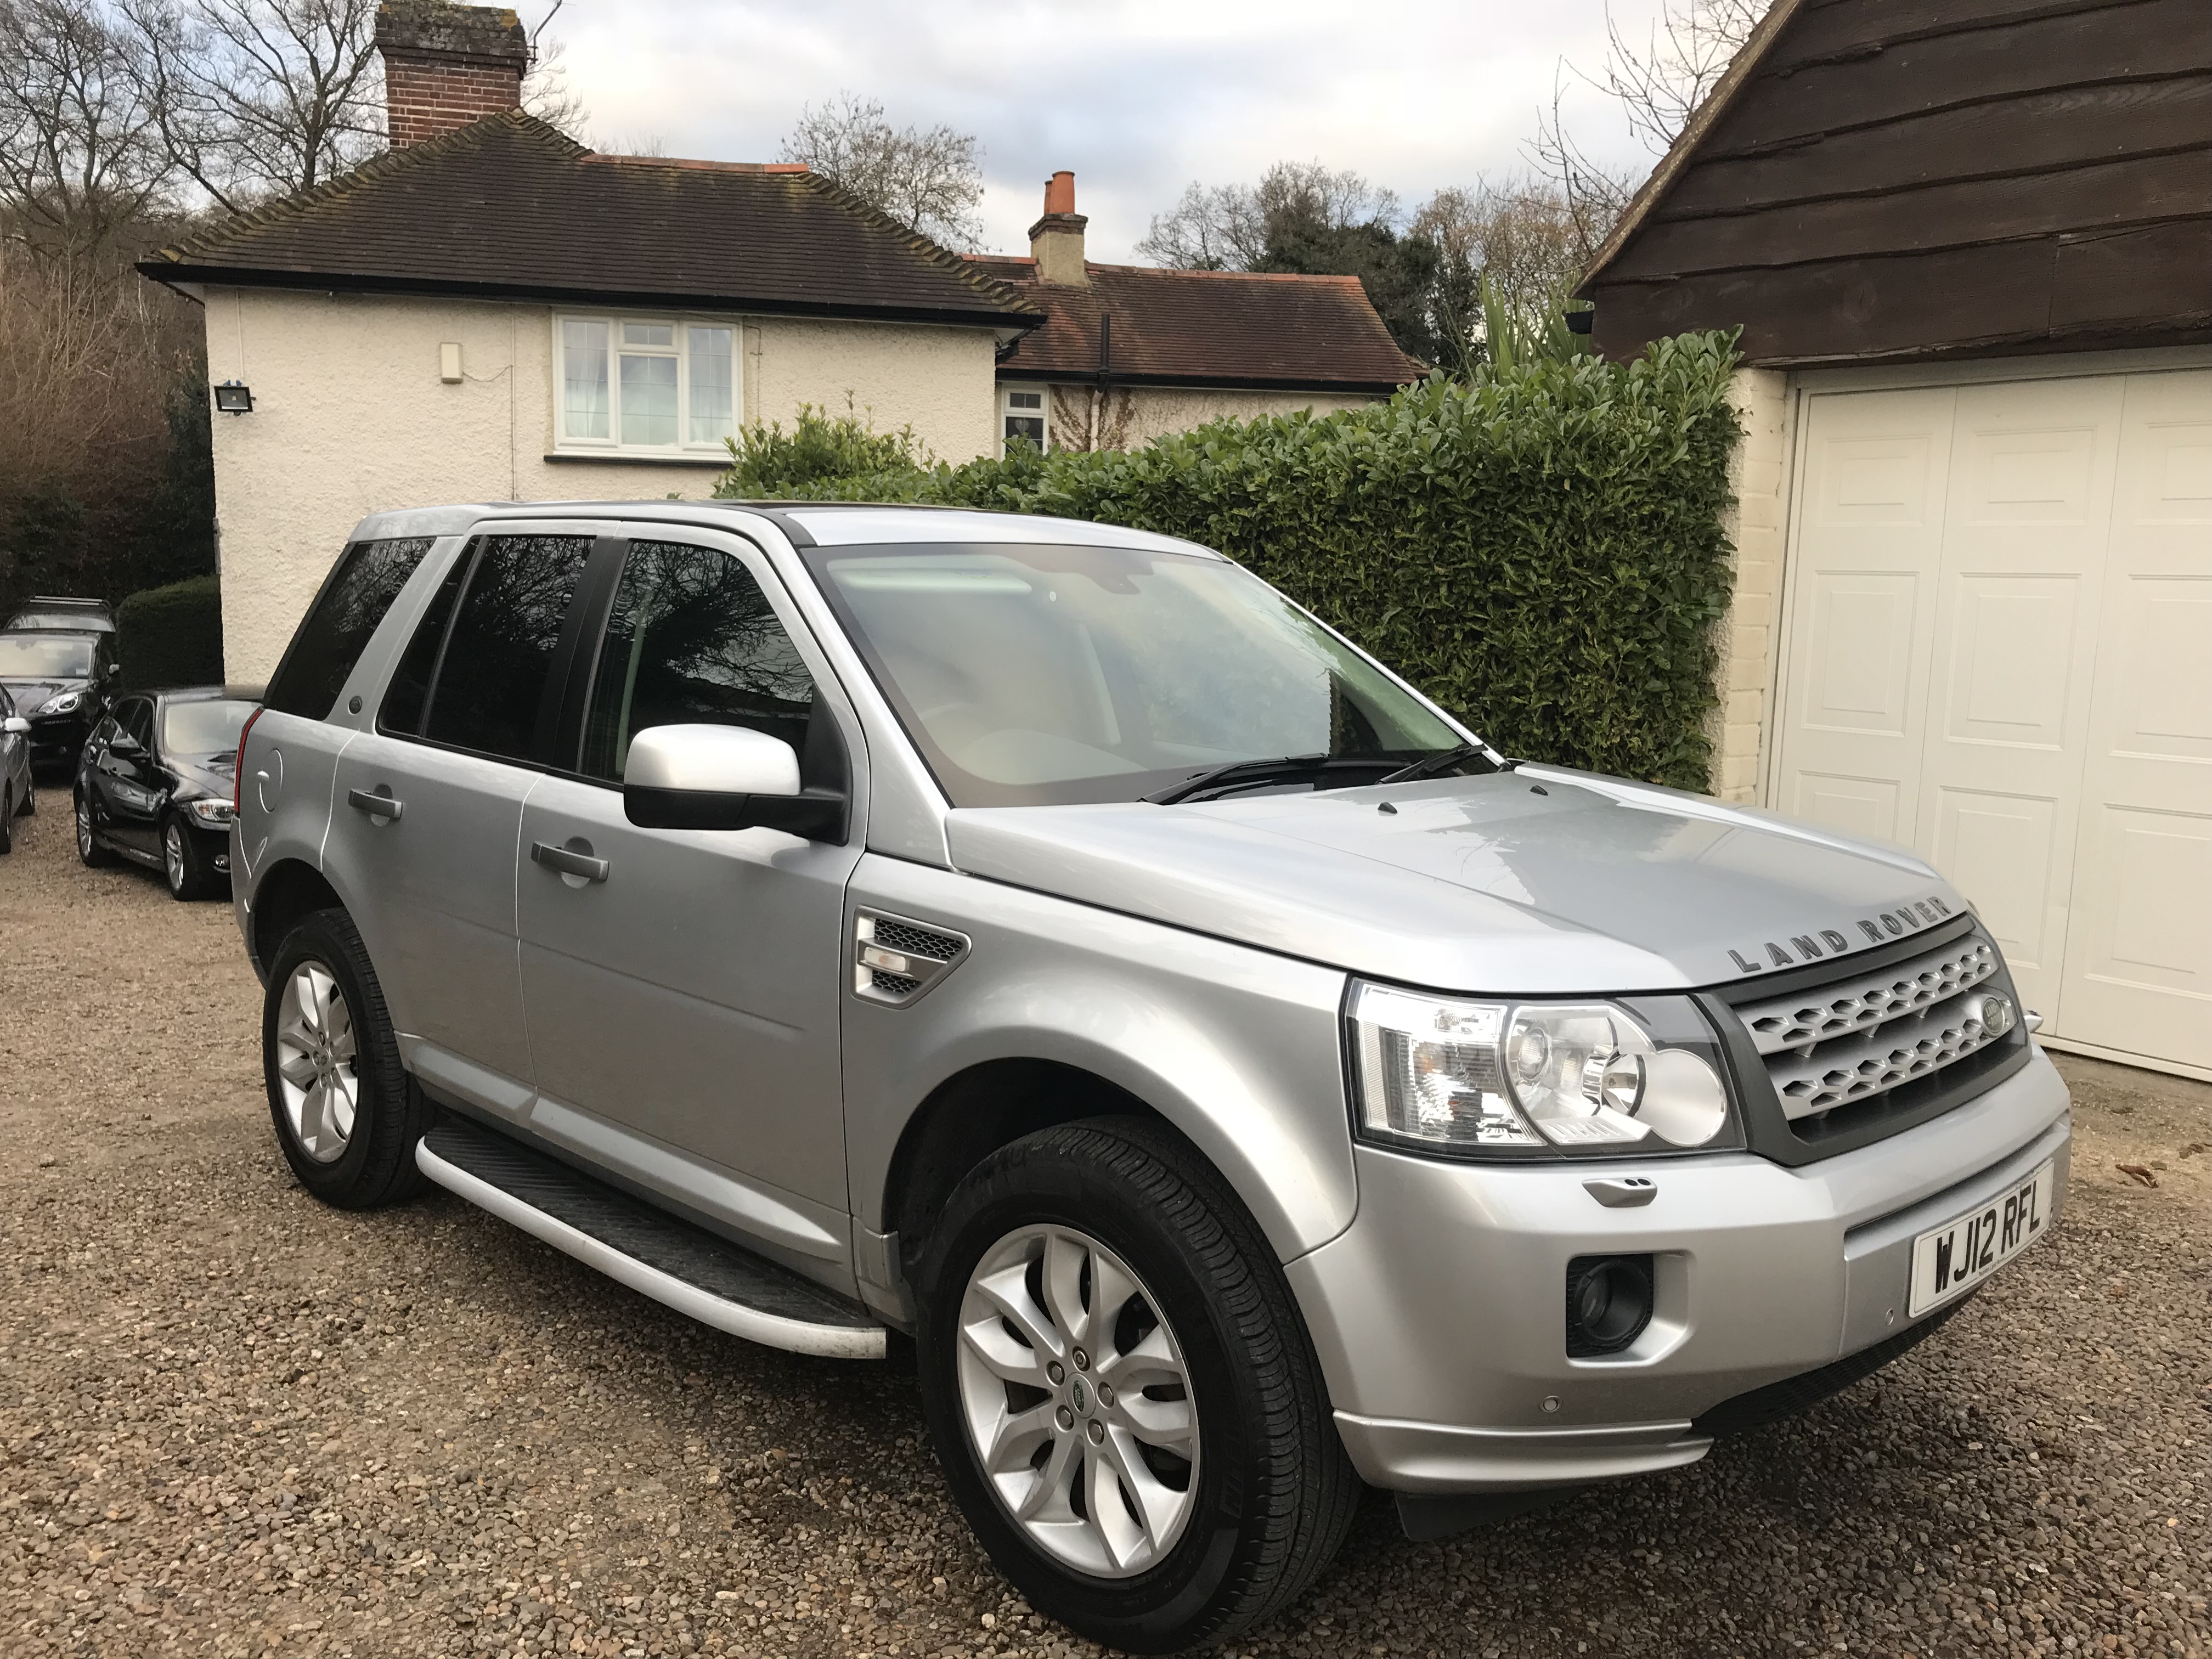 Land Rover Freelander 2 2.2 SD4 HSE AUTOMATIC GS Vehicle